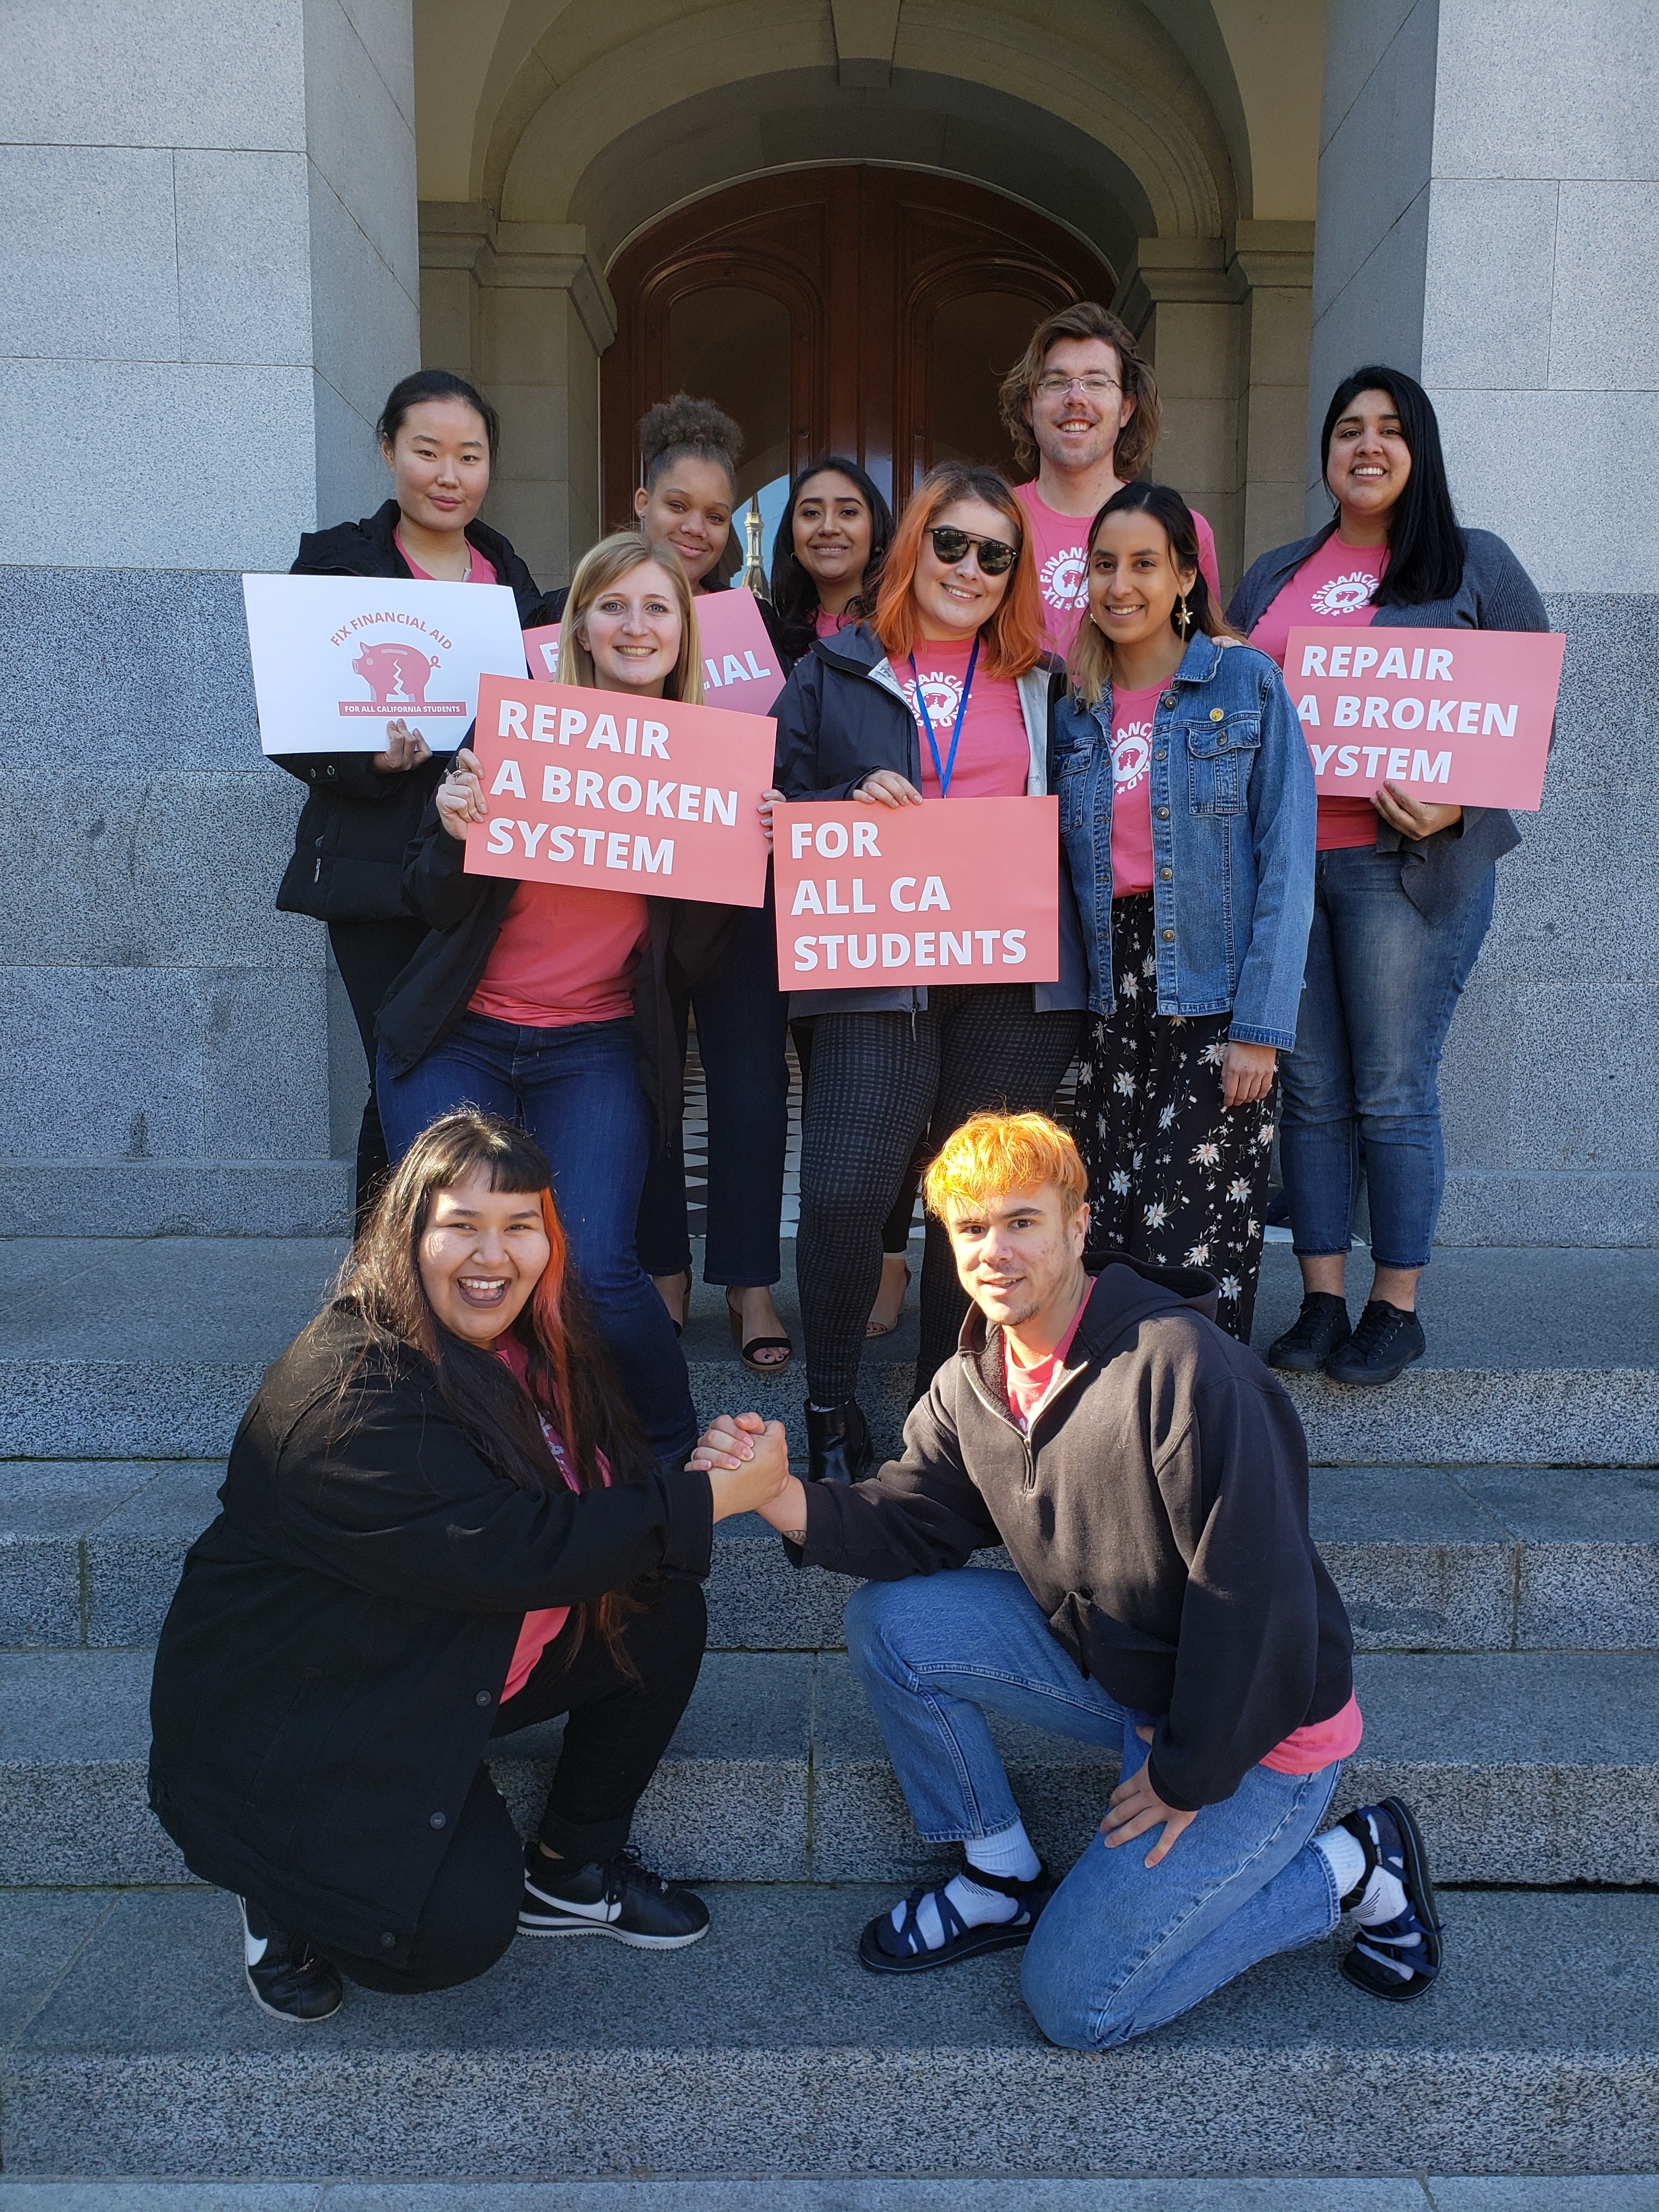 Nine Humboldt students (and one advisor) after the CSSA Rally on the State Capitol steps. At the rally, students from across the Cal State System advocated for legislators to fix financial aid so it acknolwedges the holistic costs of being a student